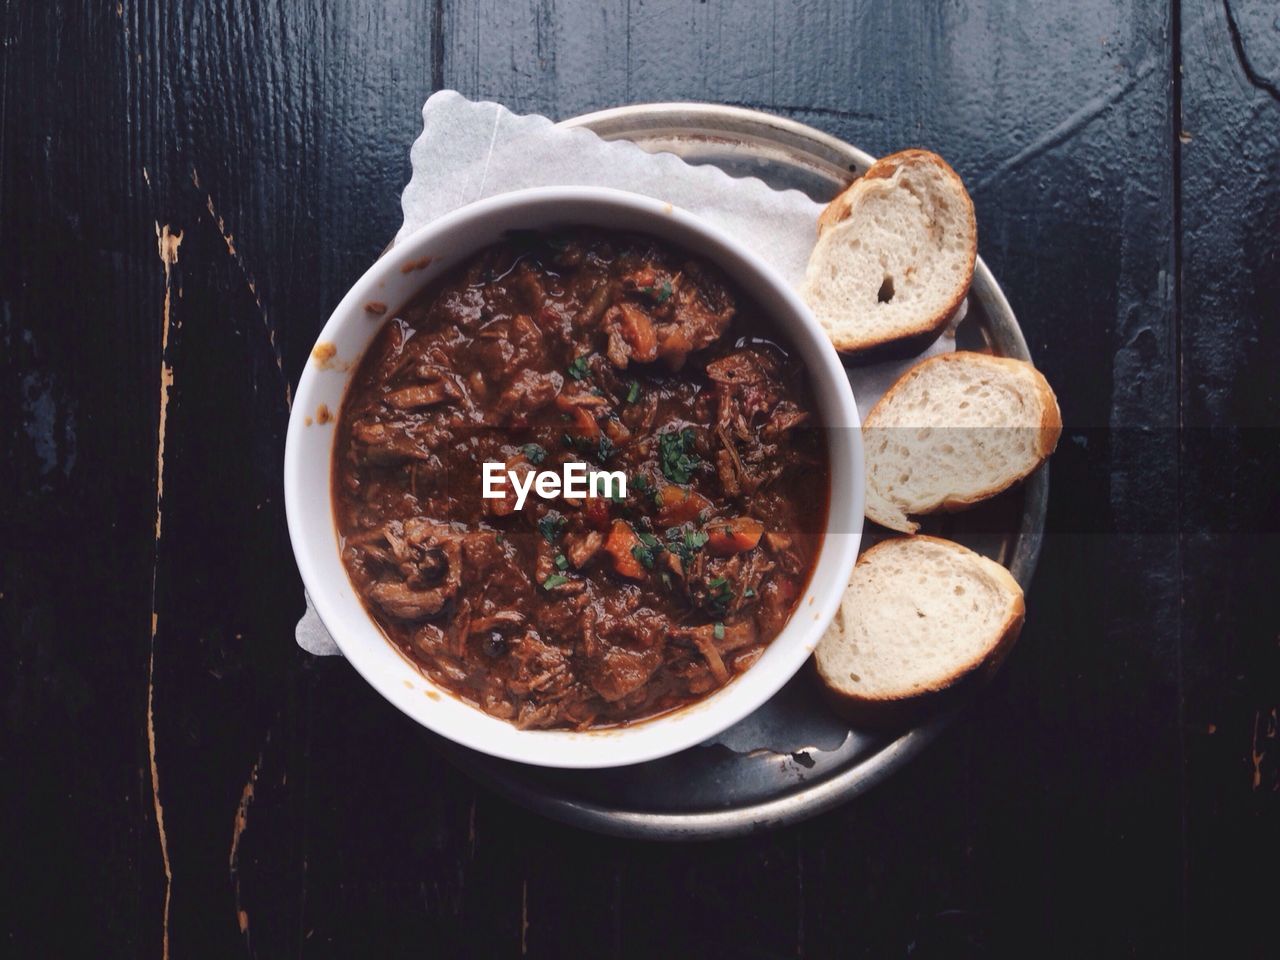 Stew with bread on table